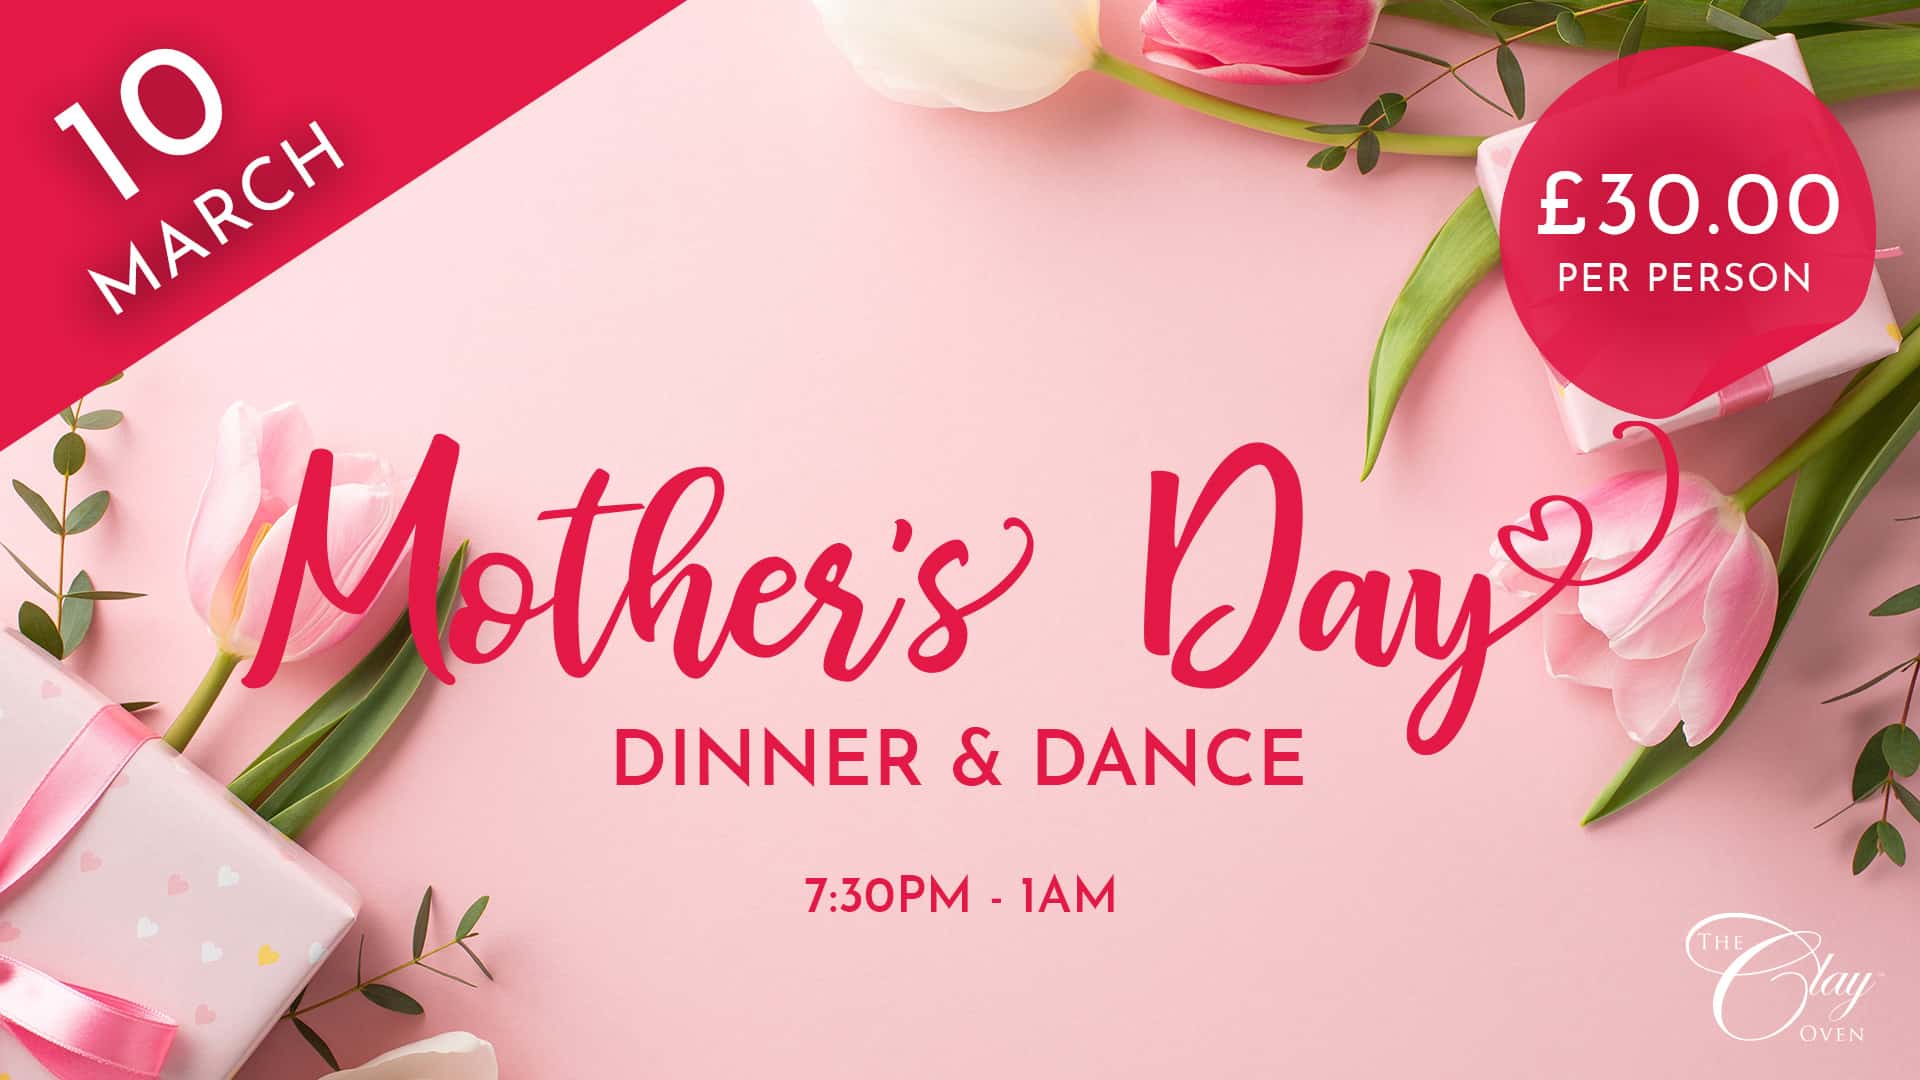 Celebrate Mother's Day with a special dinner and dance.